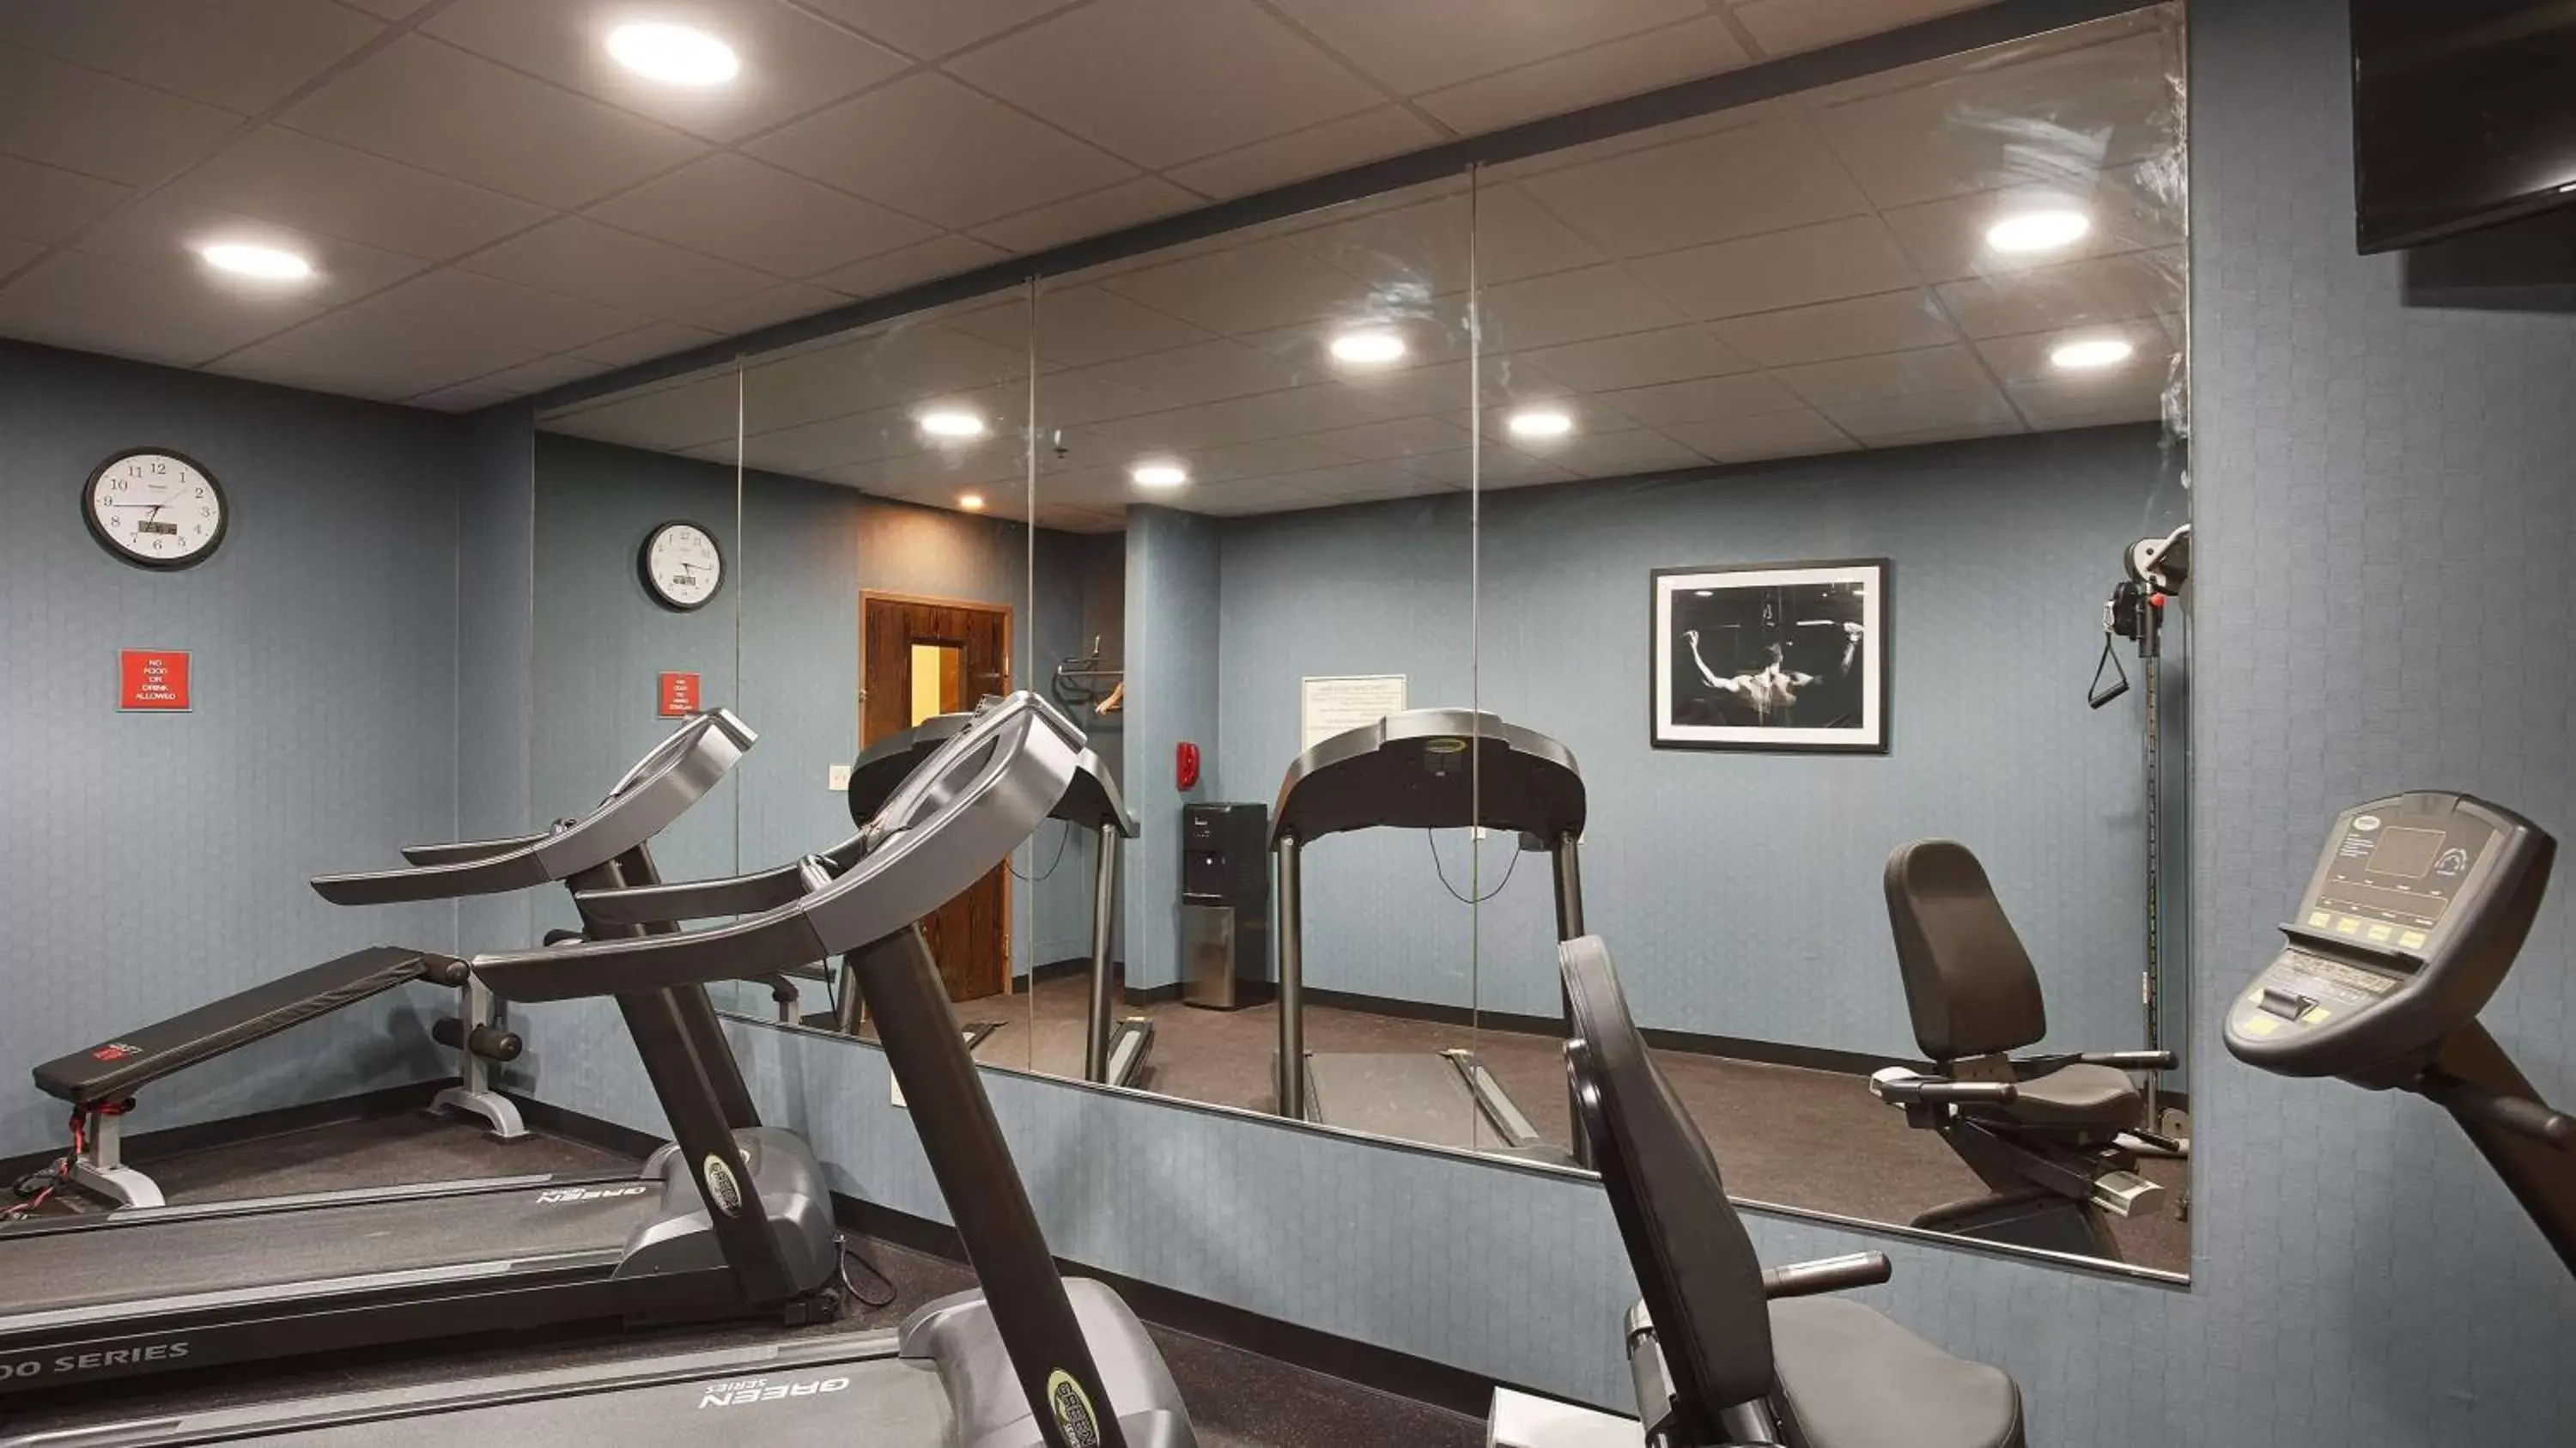 Fitness centre/facilities, Fitness Center/Facilities in Days Inn by Wyndham Indiana Benjamin Franklin Highway